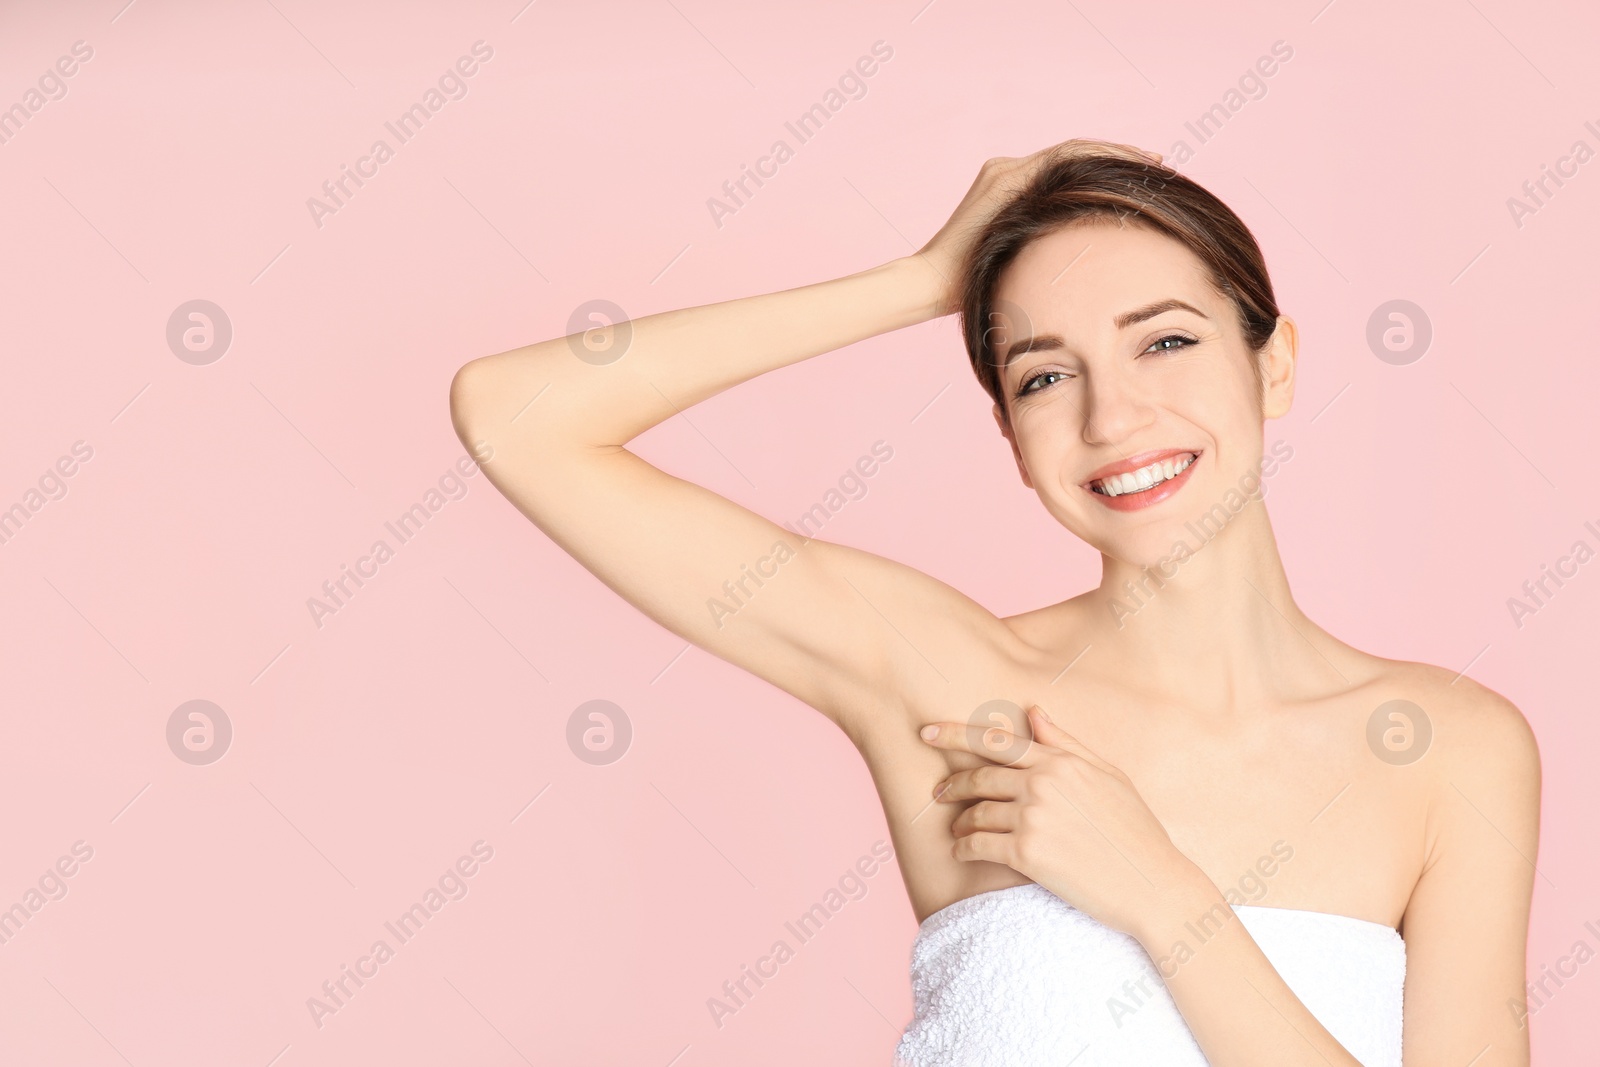 Photo of Young woman showing armpit with smooth clean skin on pink background